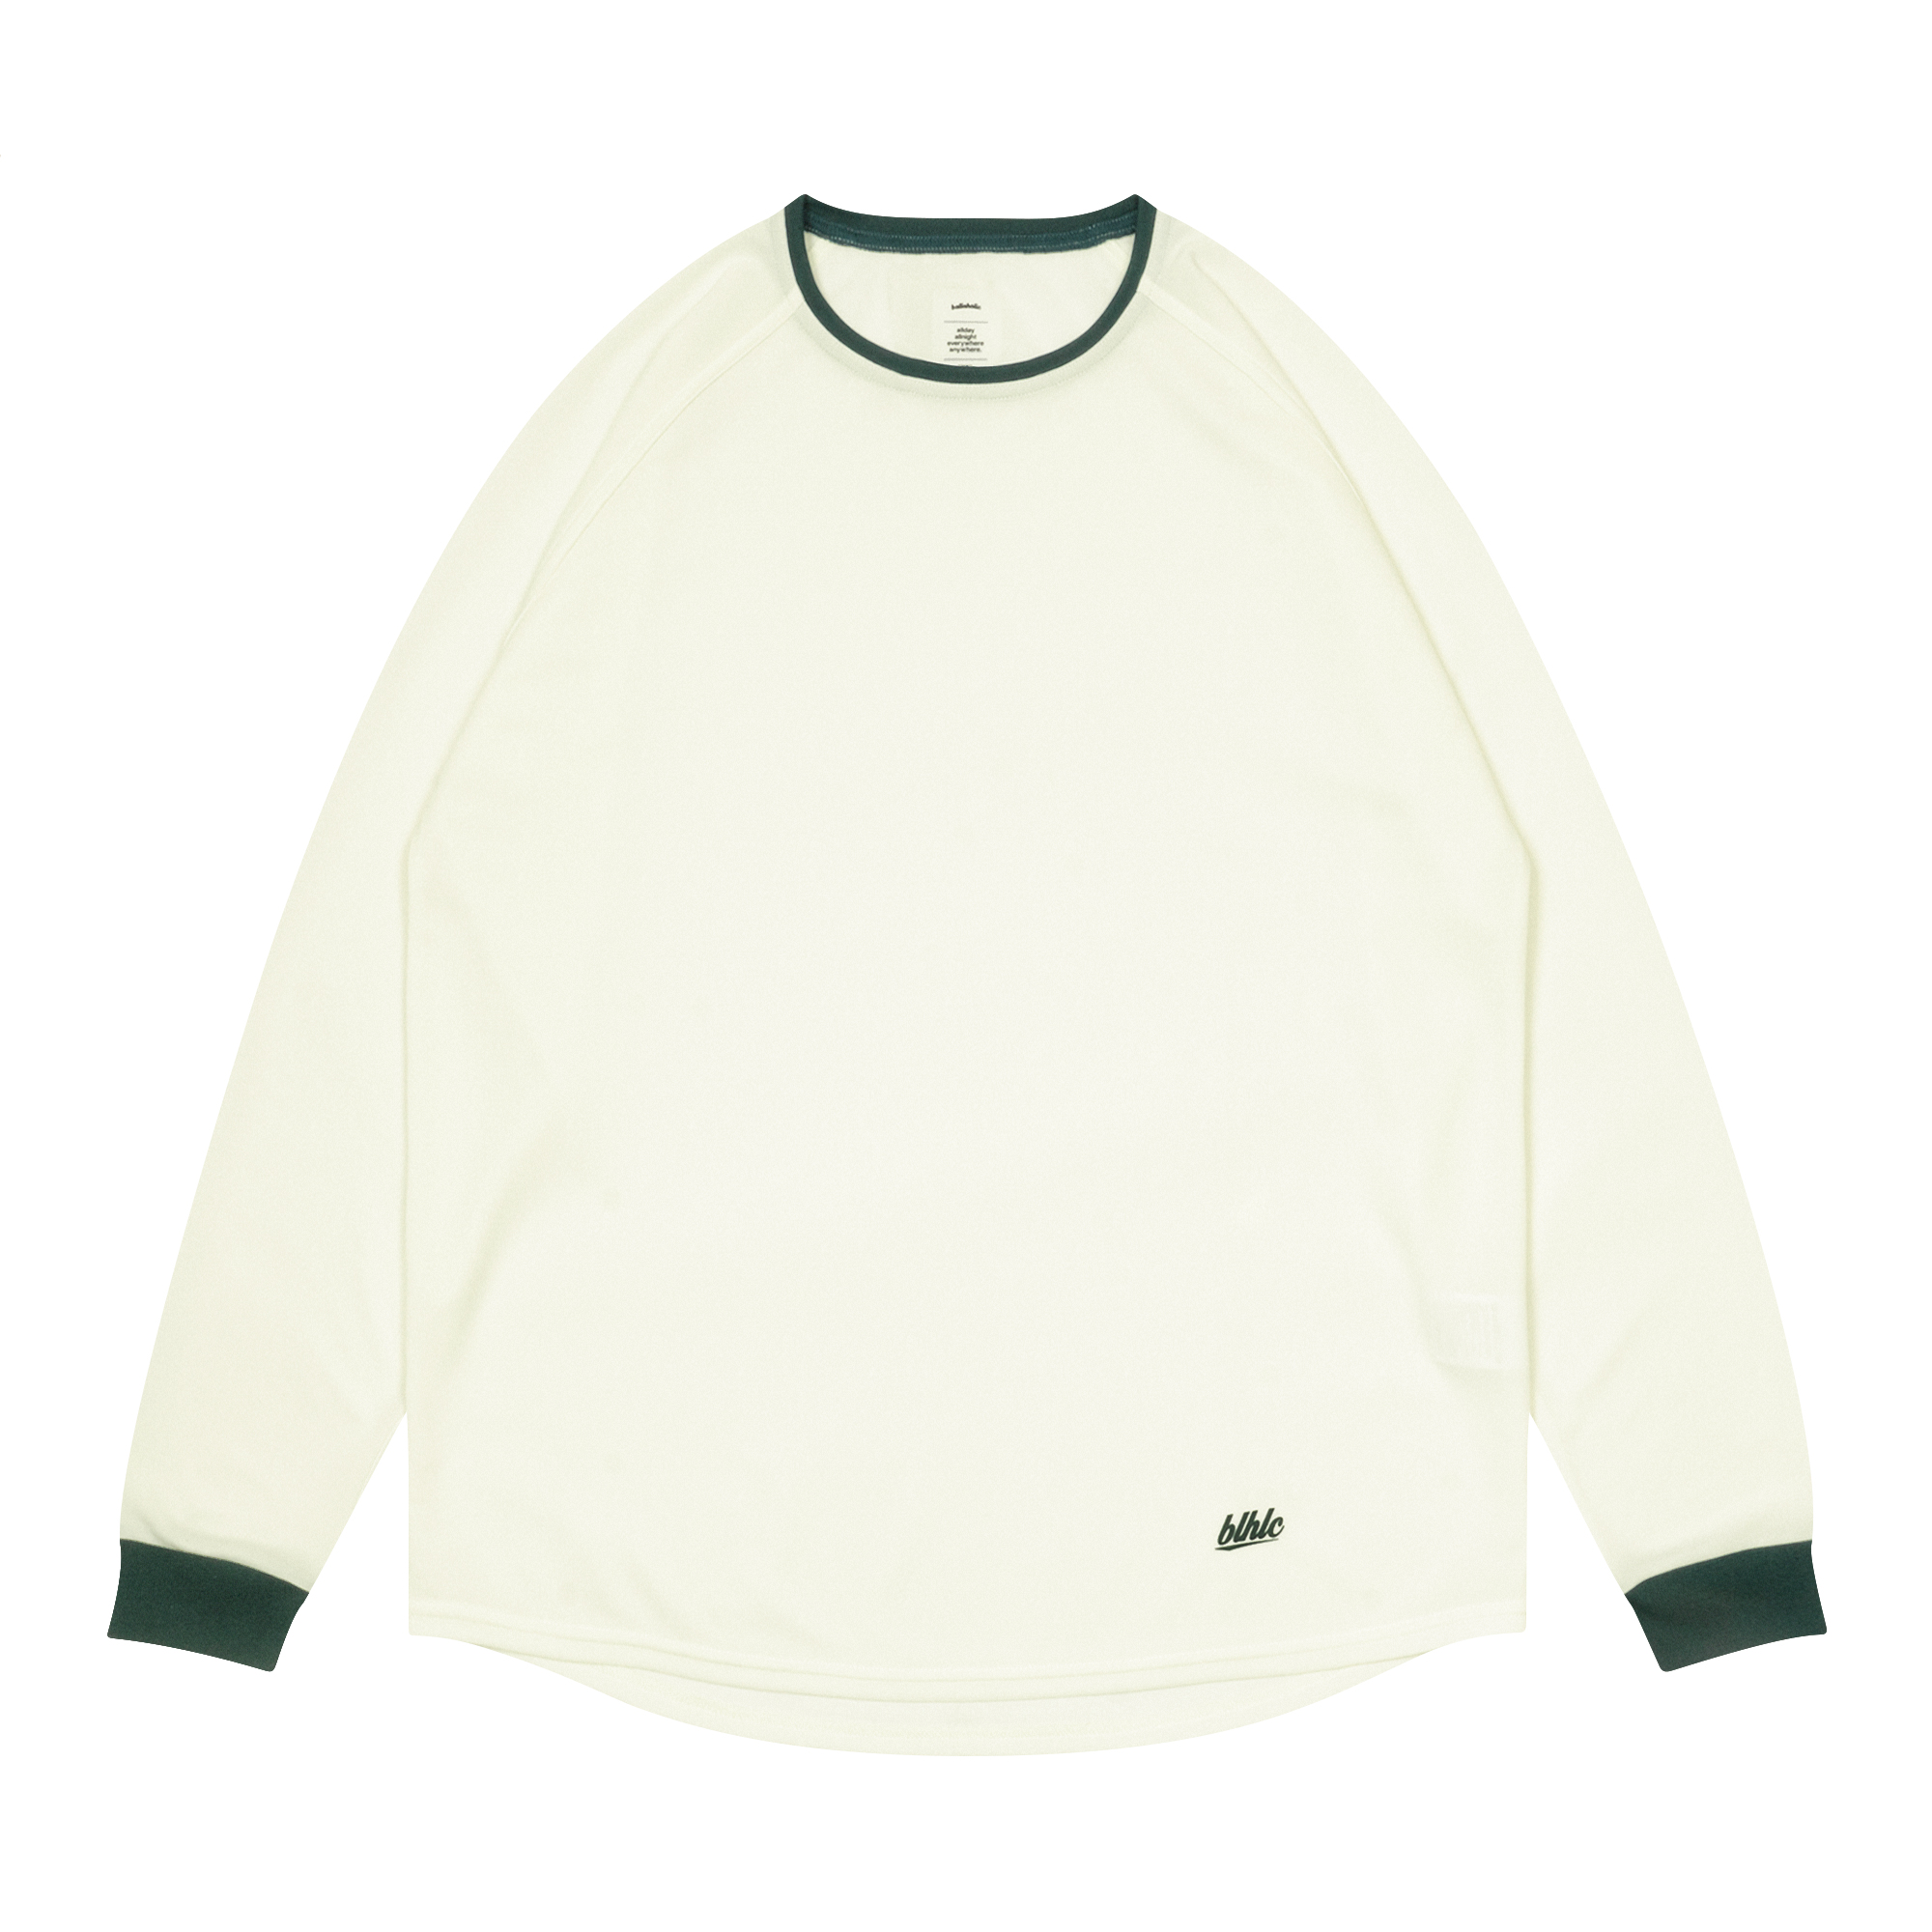 blhlc Cool Long Tee (off white/dark green)